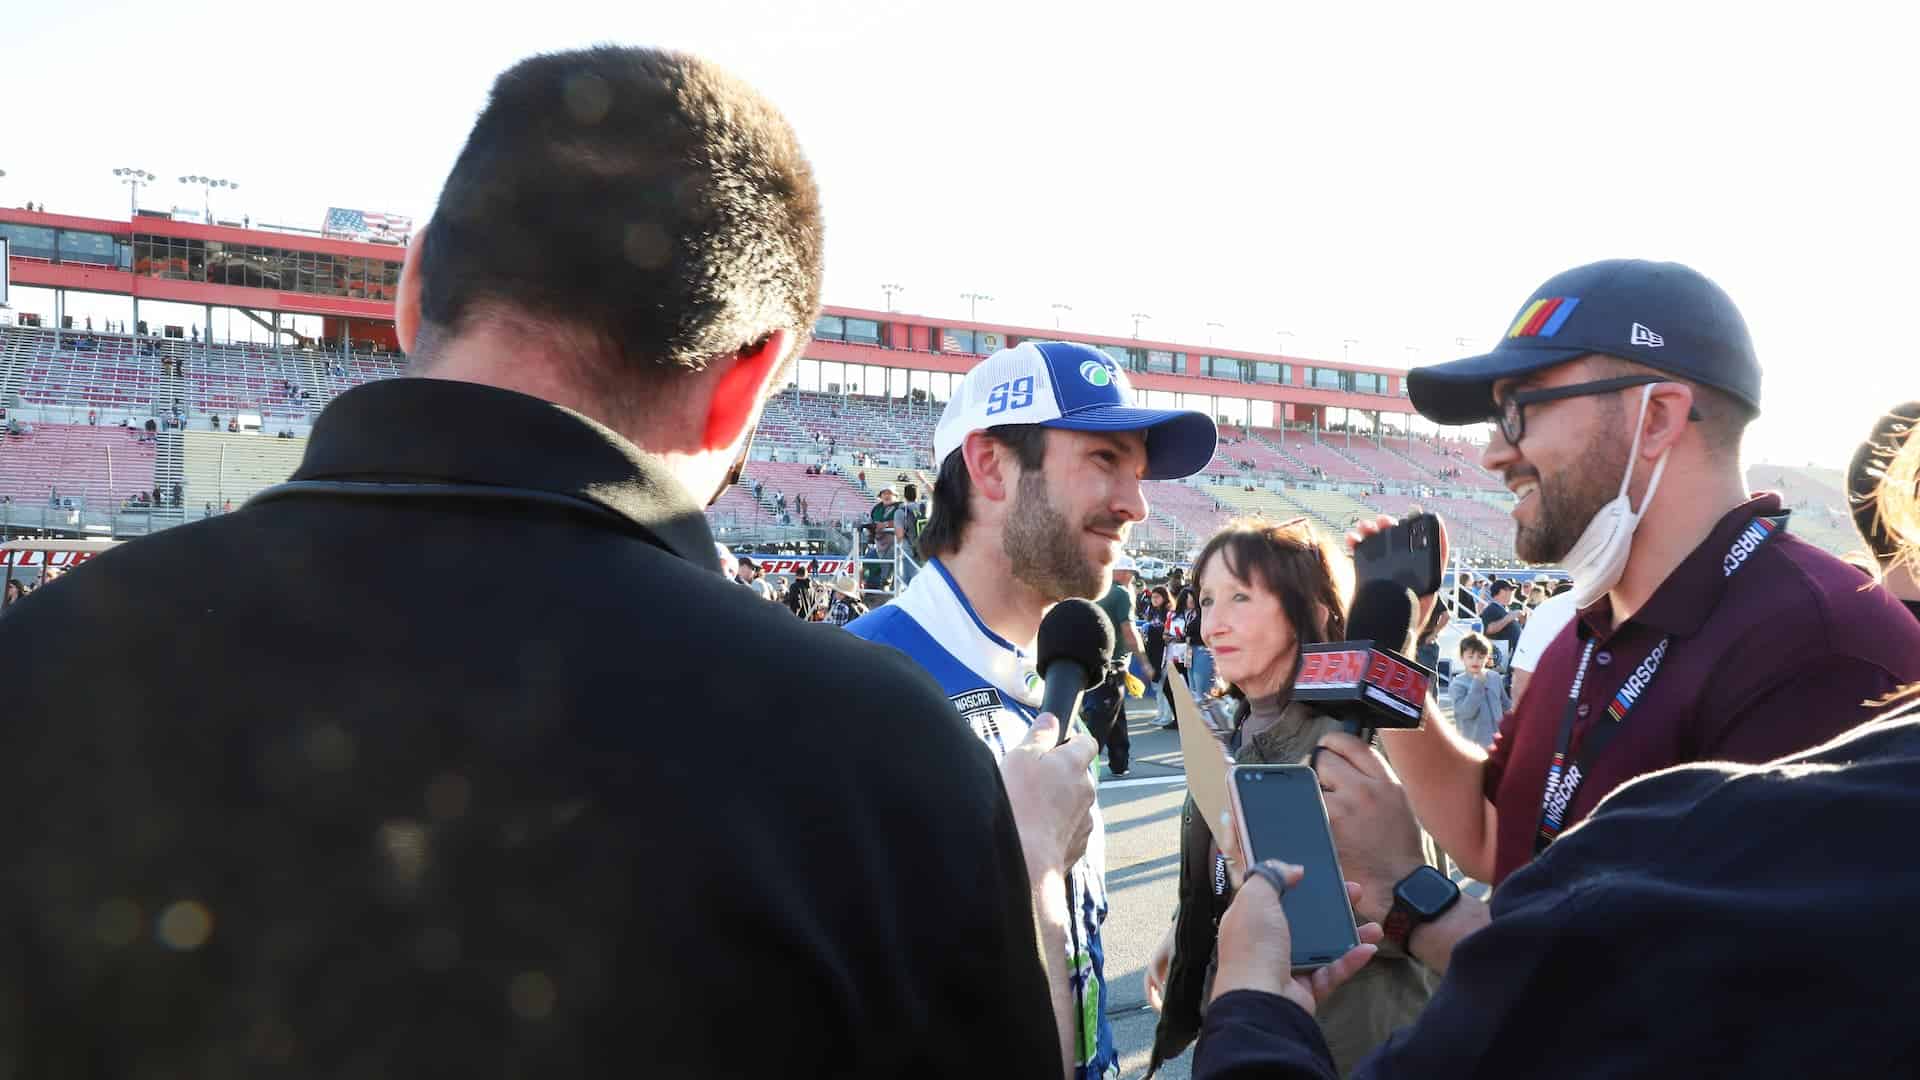 Daniel Suarez comes close to his first career NASCAR Cup Series win at Auto Club Speedway. Photo by Rachel Schuoler with Kickin' the Tires.